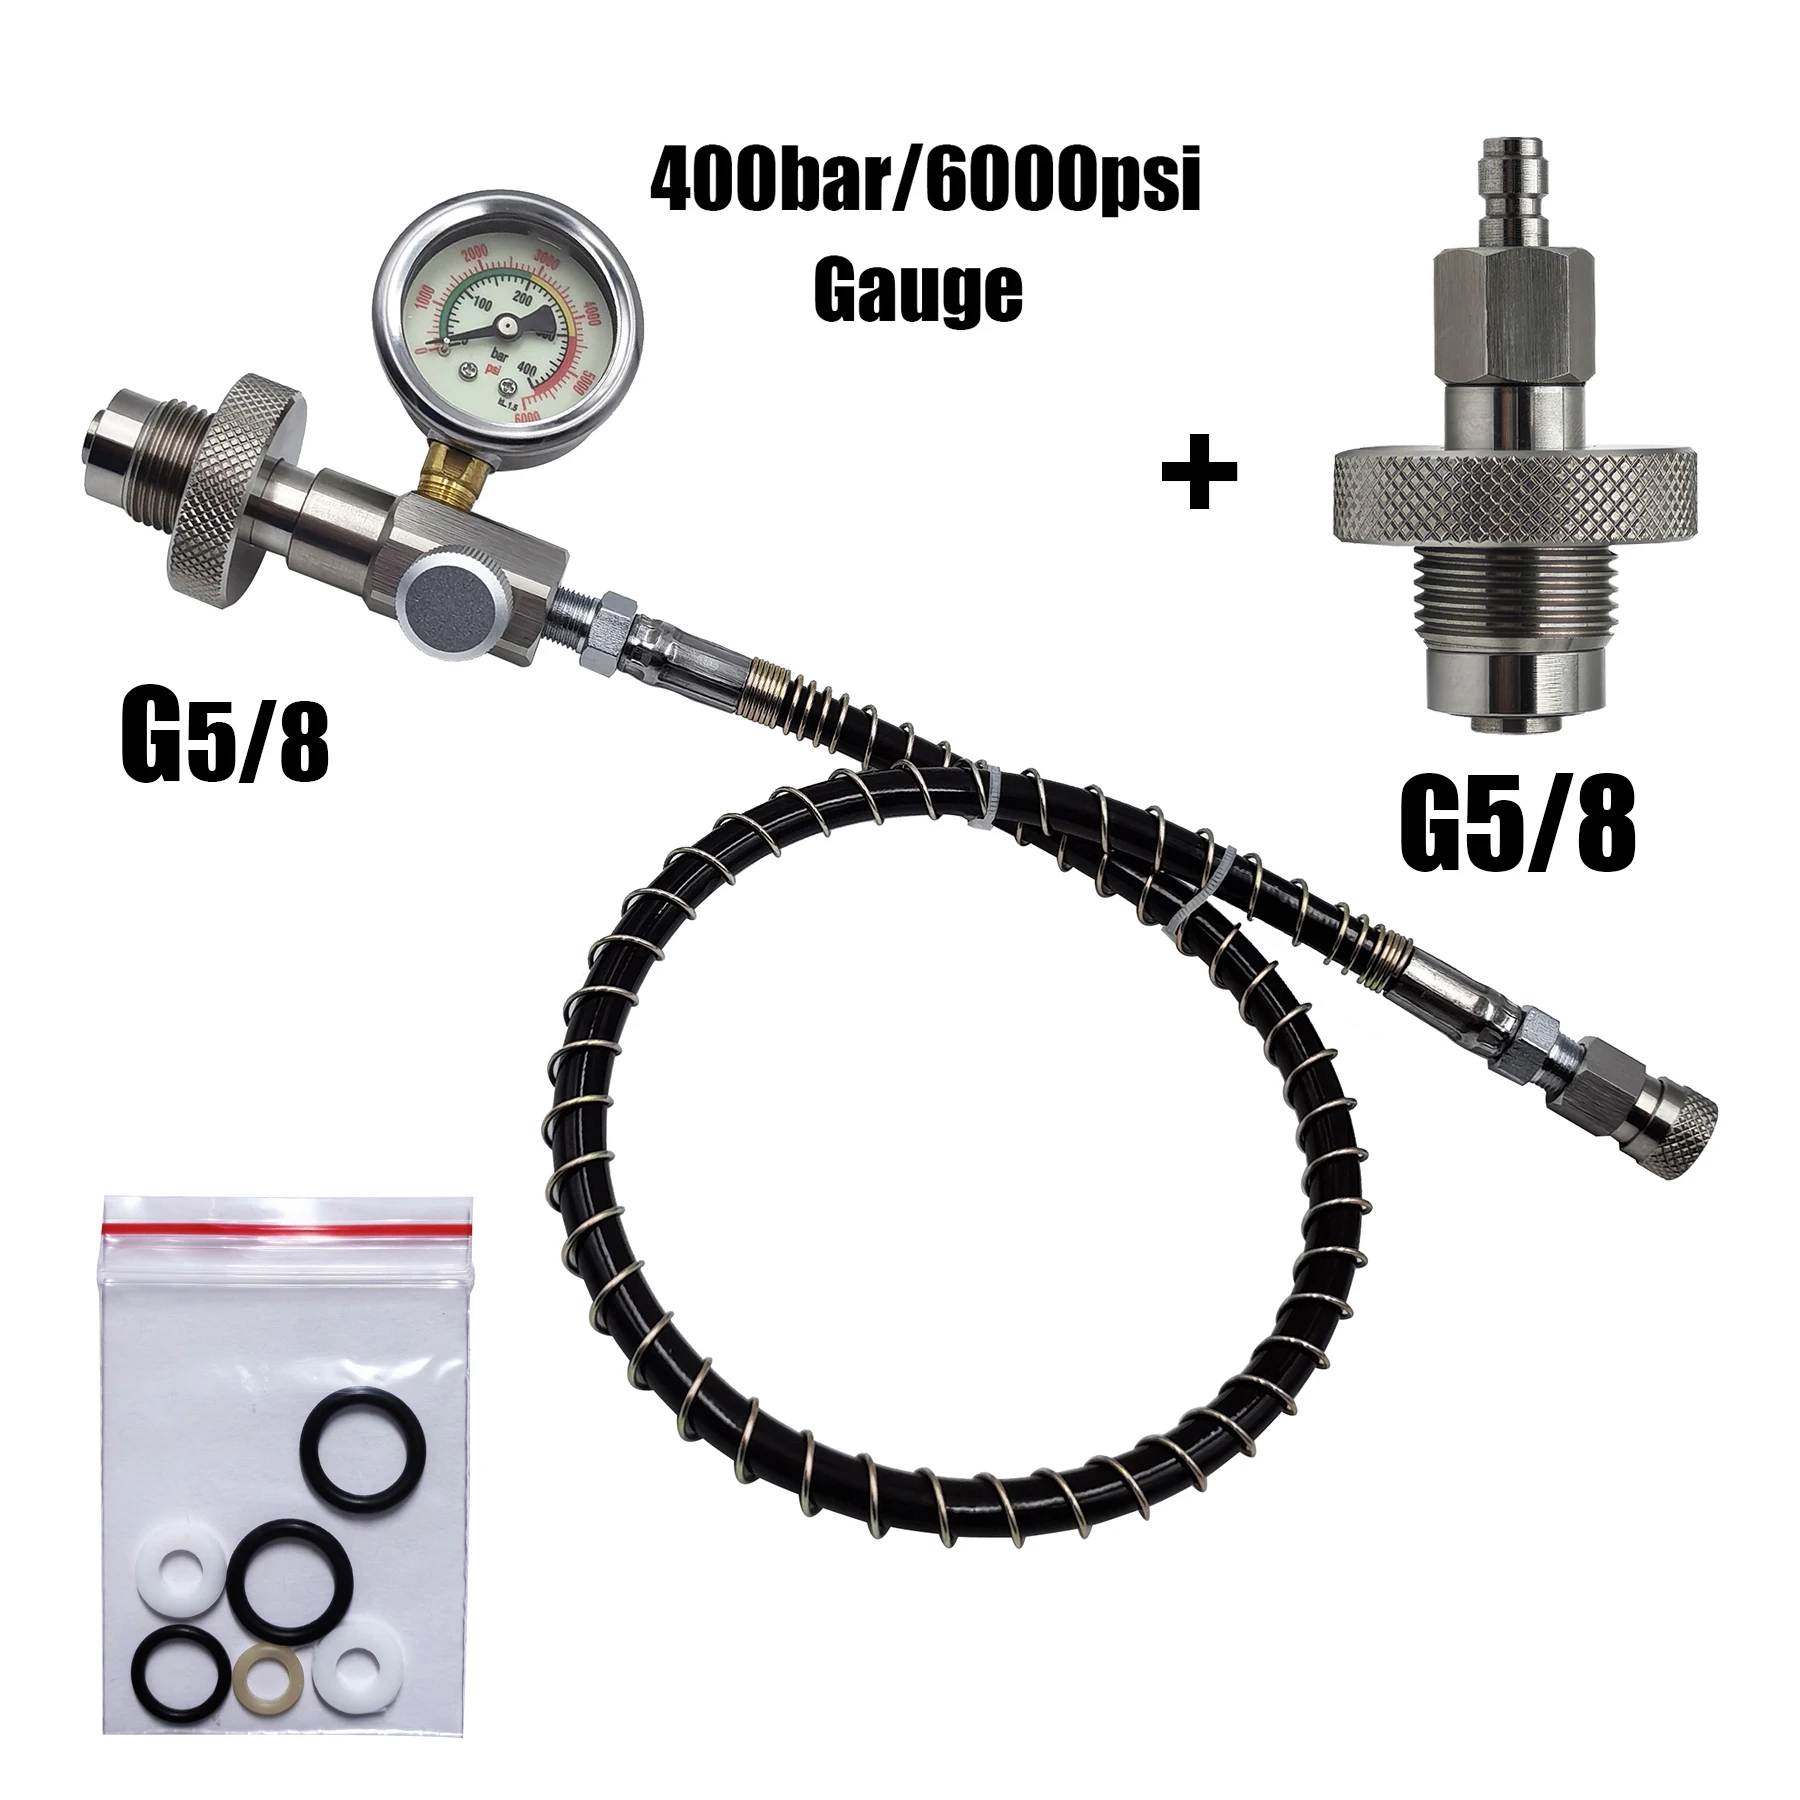 hp-filling-station-chargeing-adapter-din-connector-hpa-scuba-diving-with-g5-8-connector-stainless-steel-6000psi-400bar-gauge